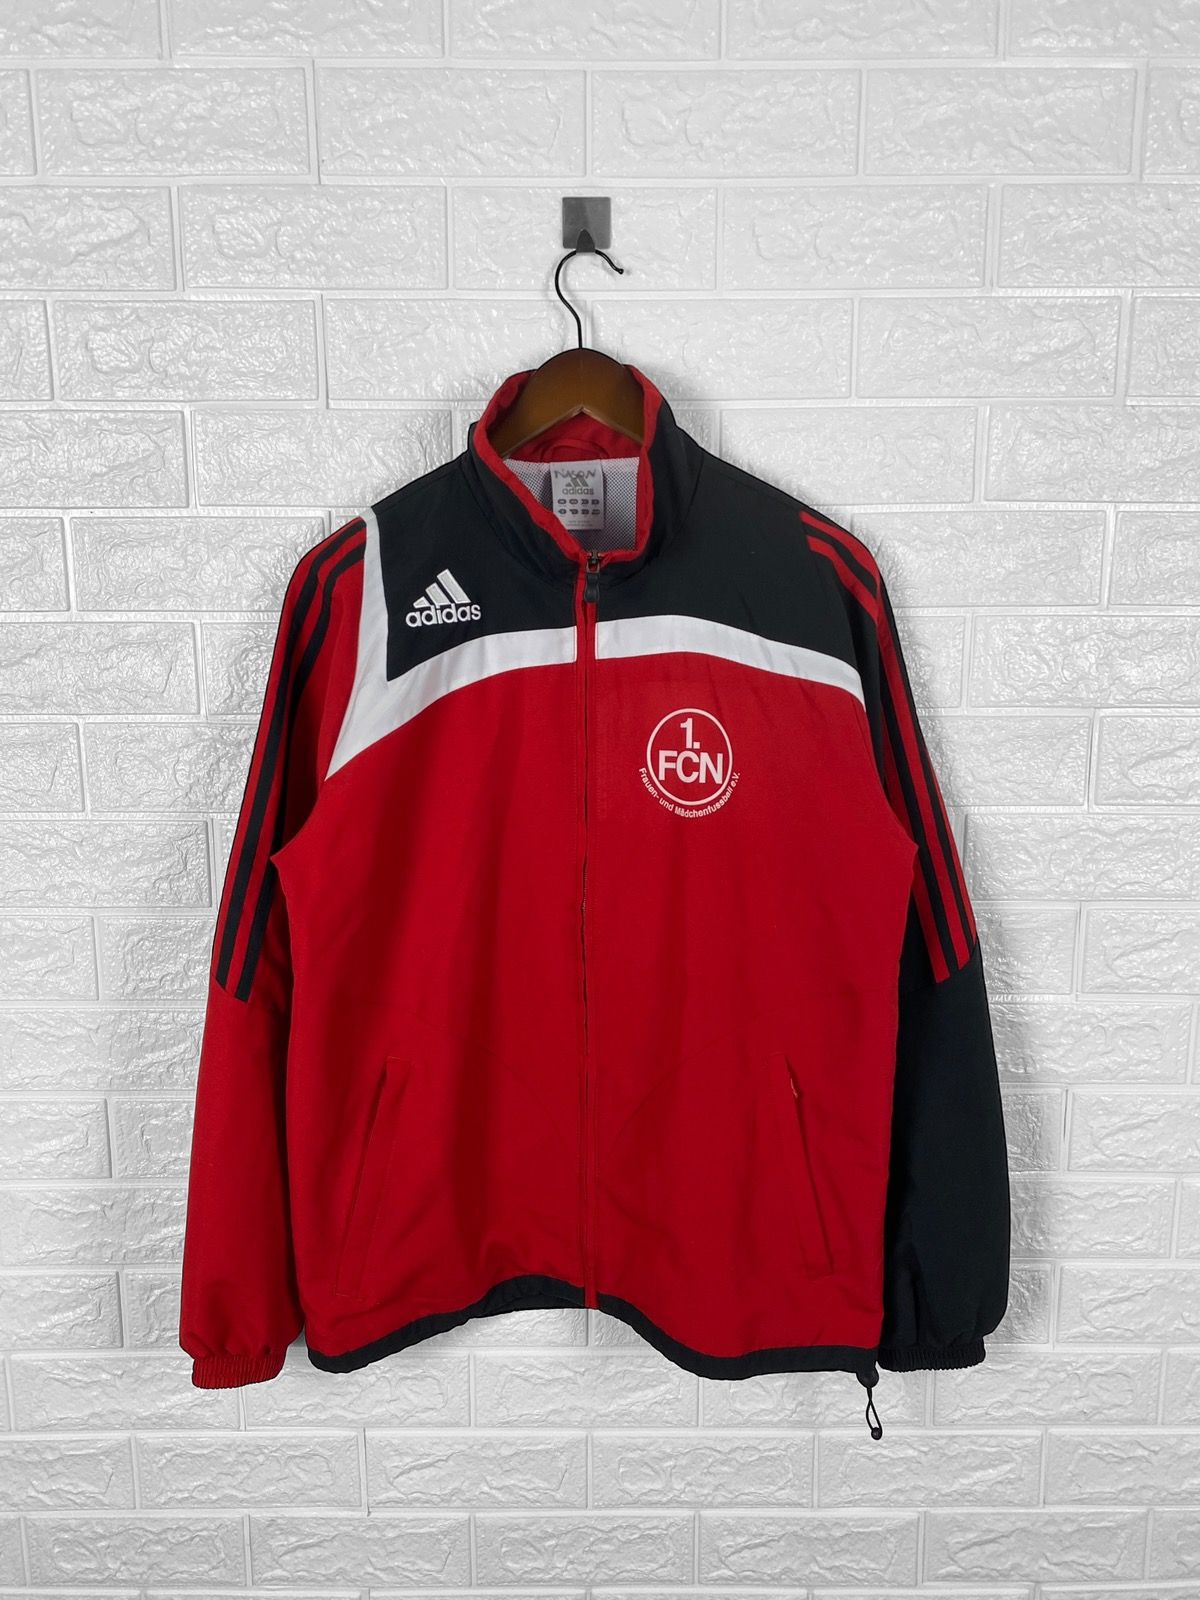 Pre-owned Adidas X Jersey Vintage 2008 Adidas Fc Nurnberg Football Light Jacket In Red